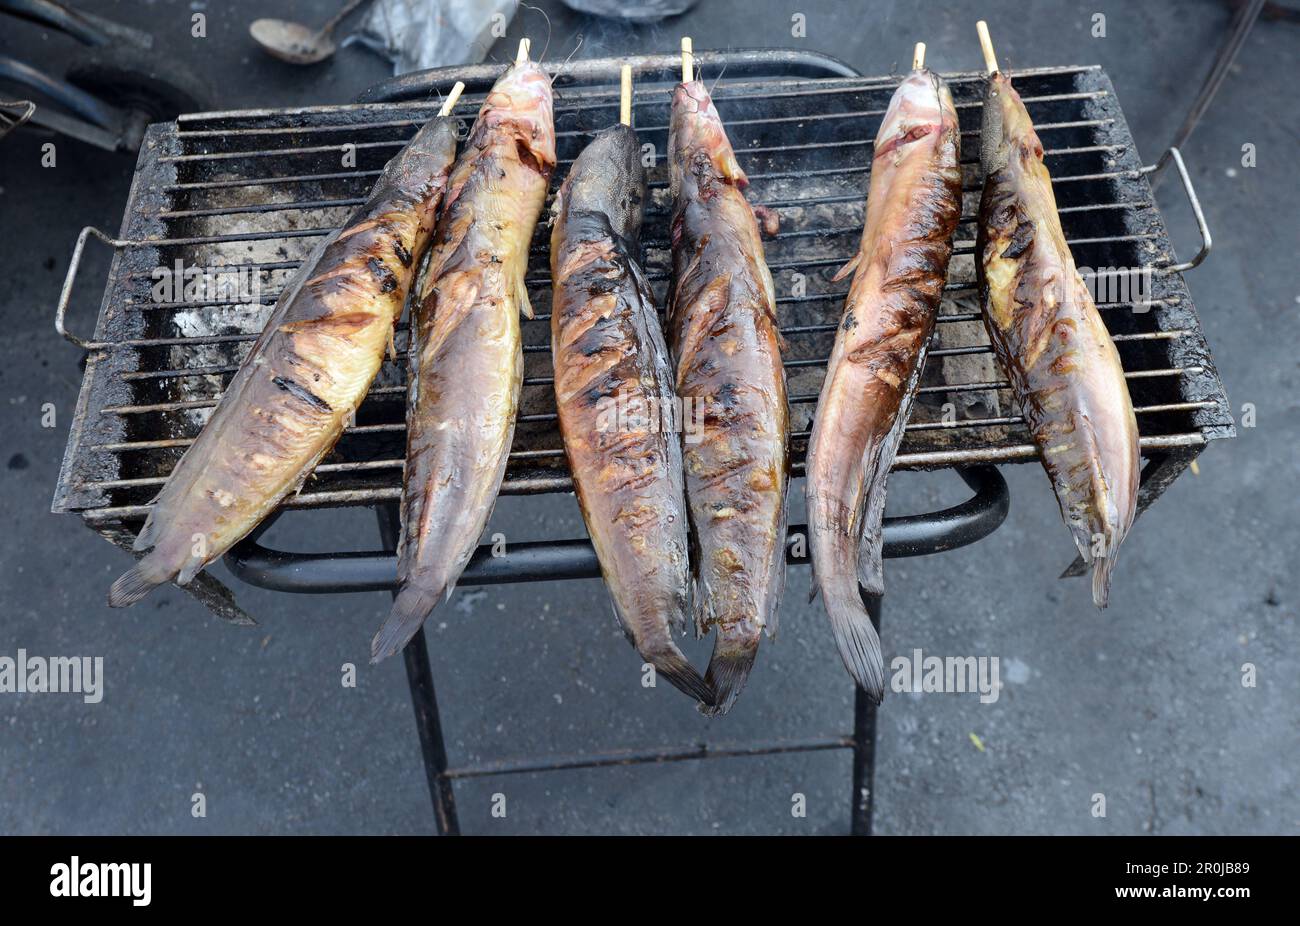 Grilled catfish cooked and sold by a vendor in Bangkok, Thailand. Stock Photo